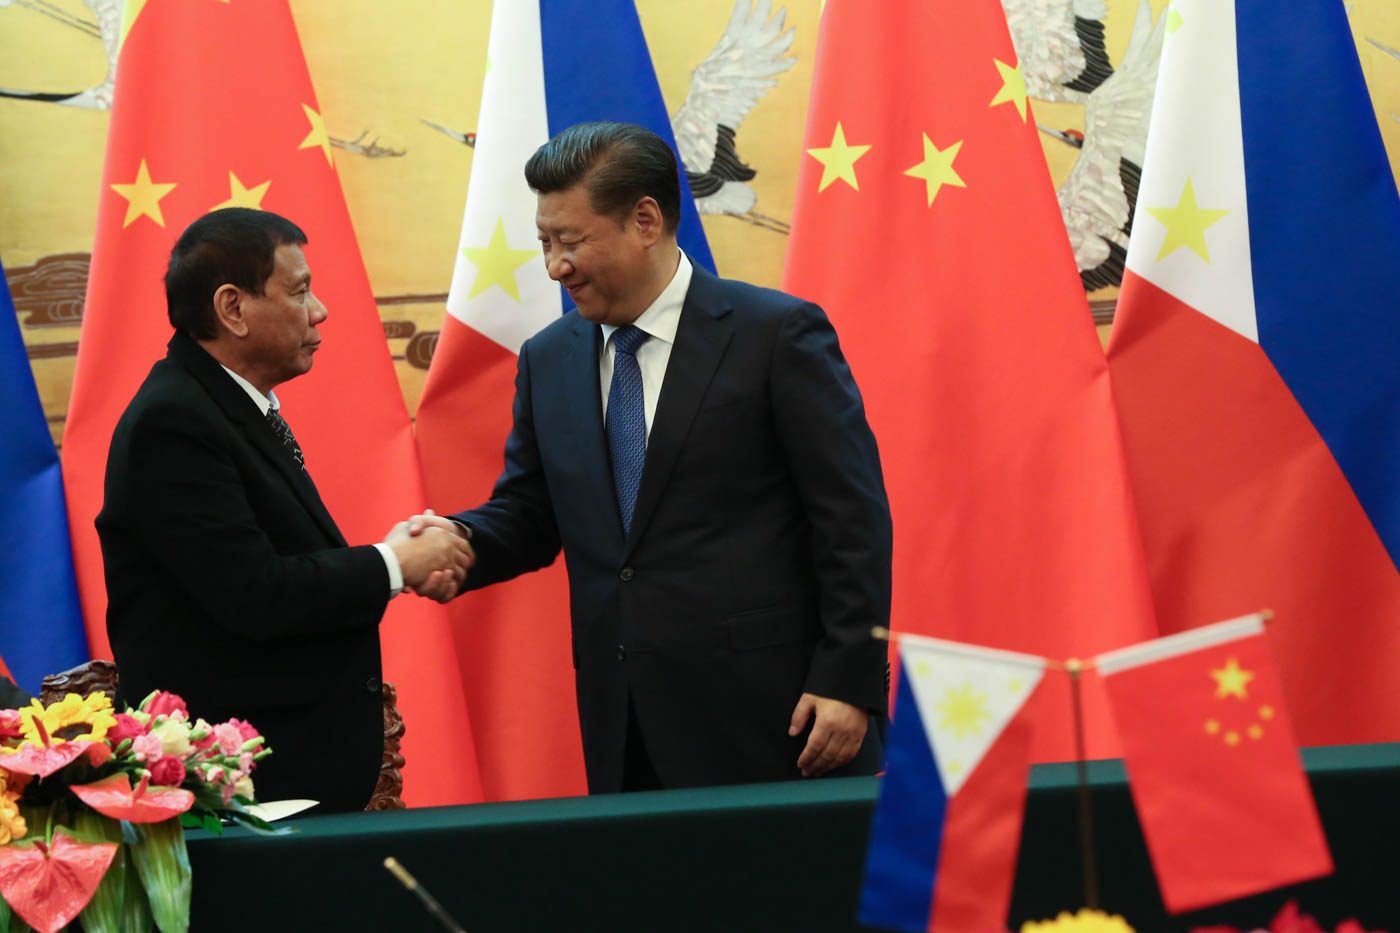 Duterte in Belt and Road Forum affirms PH back in China’s embrace